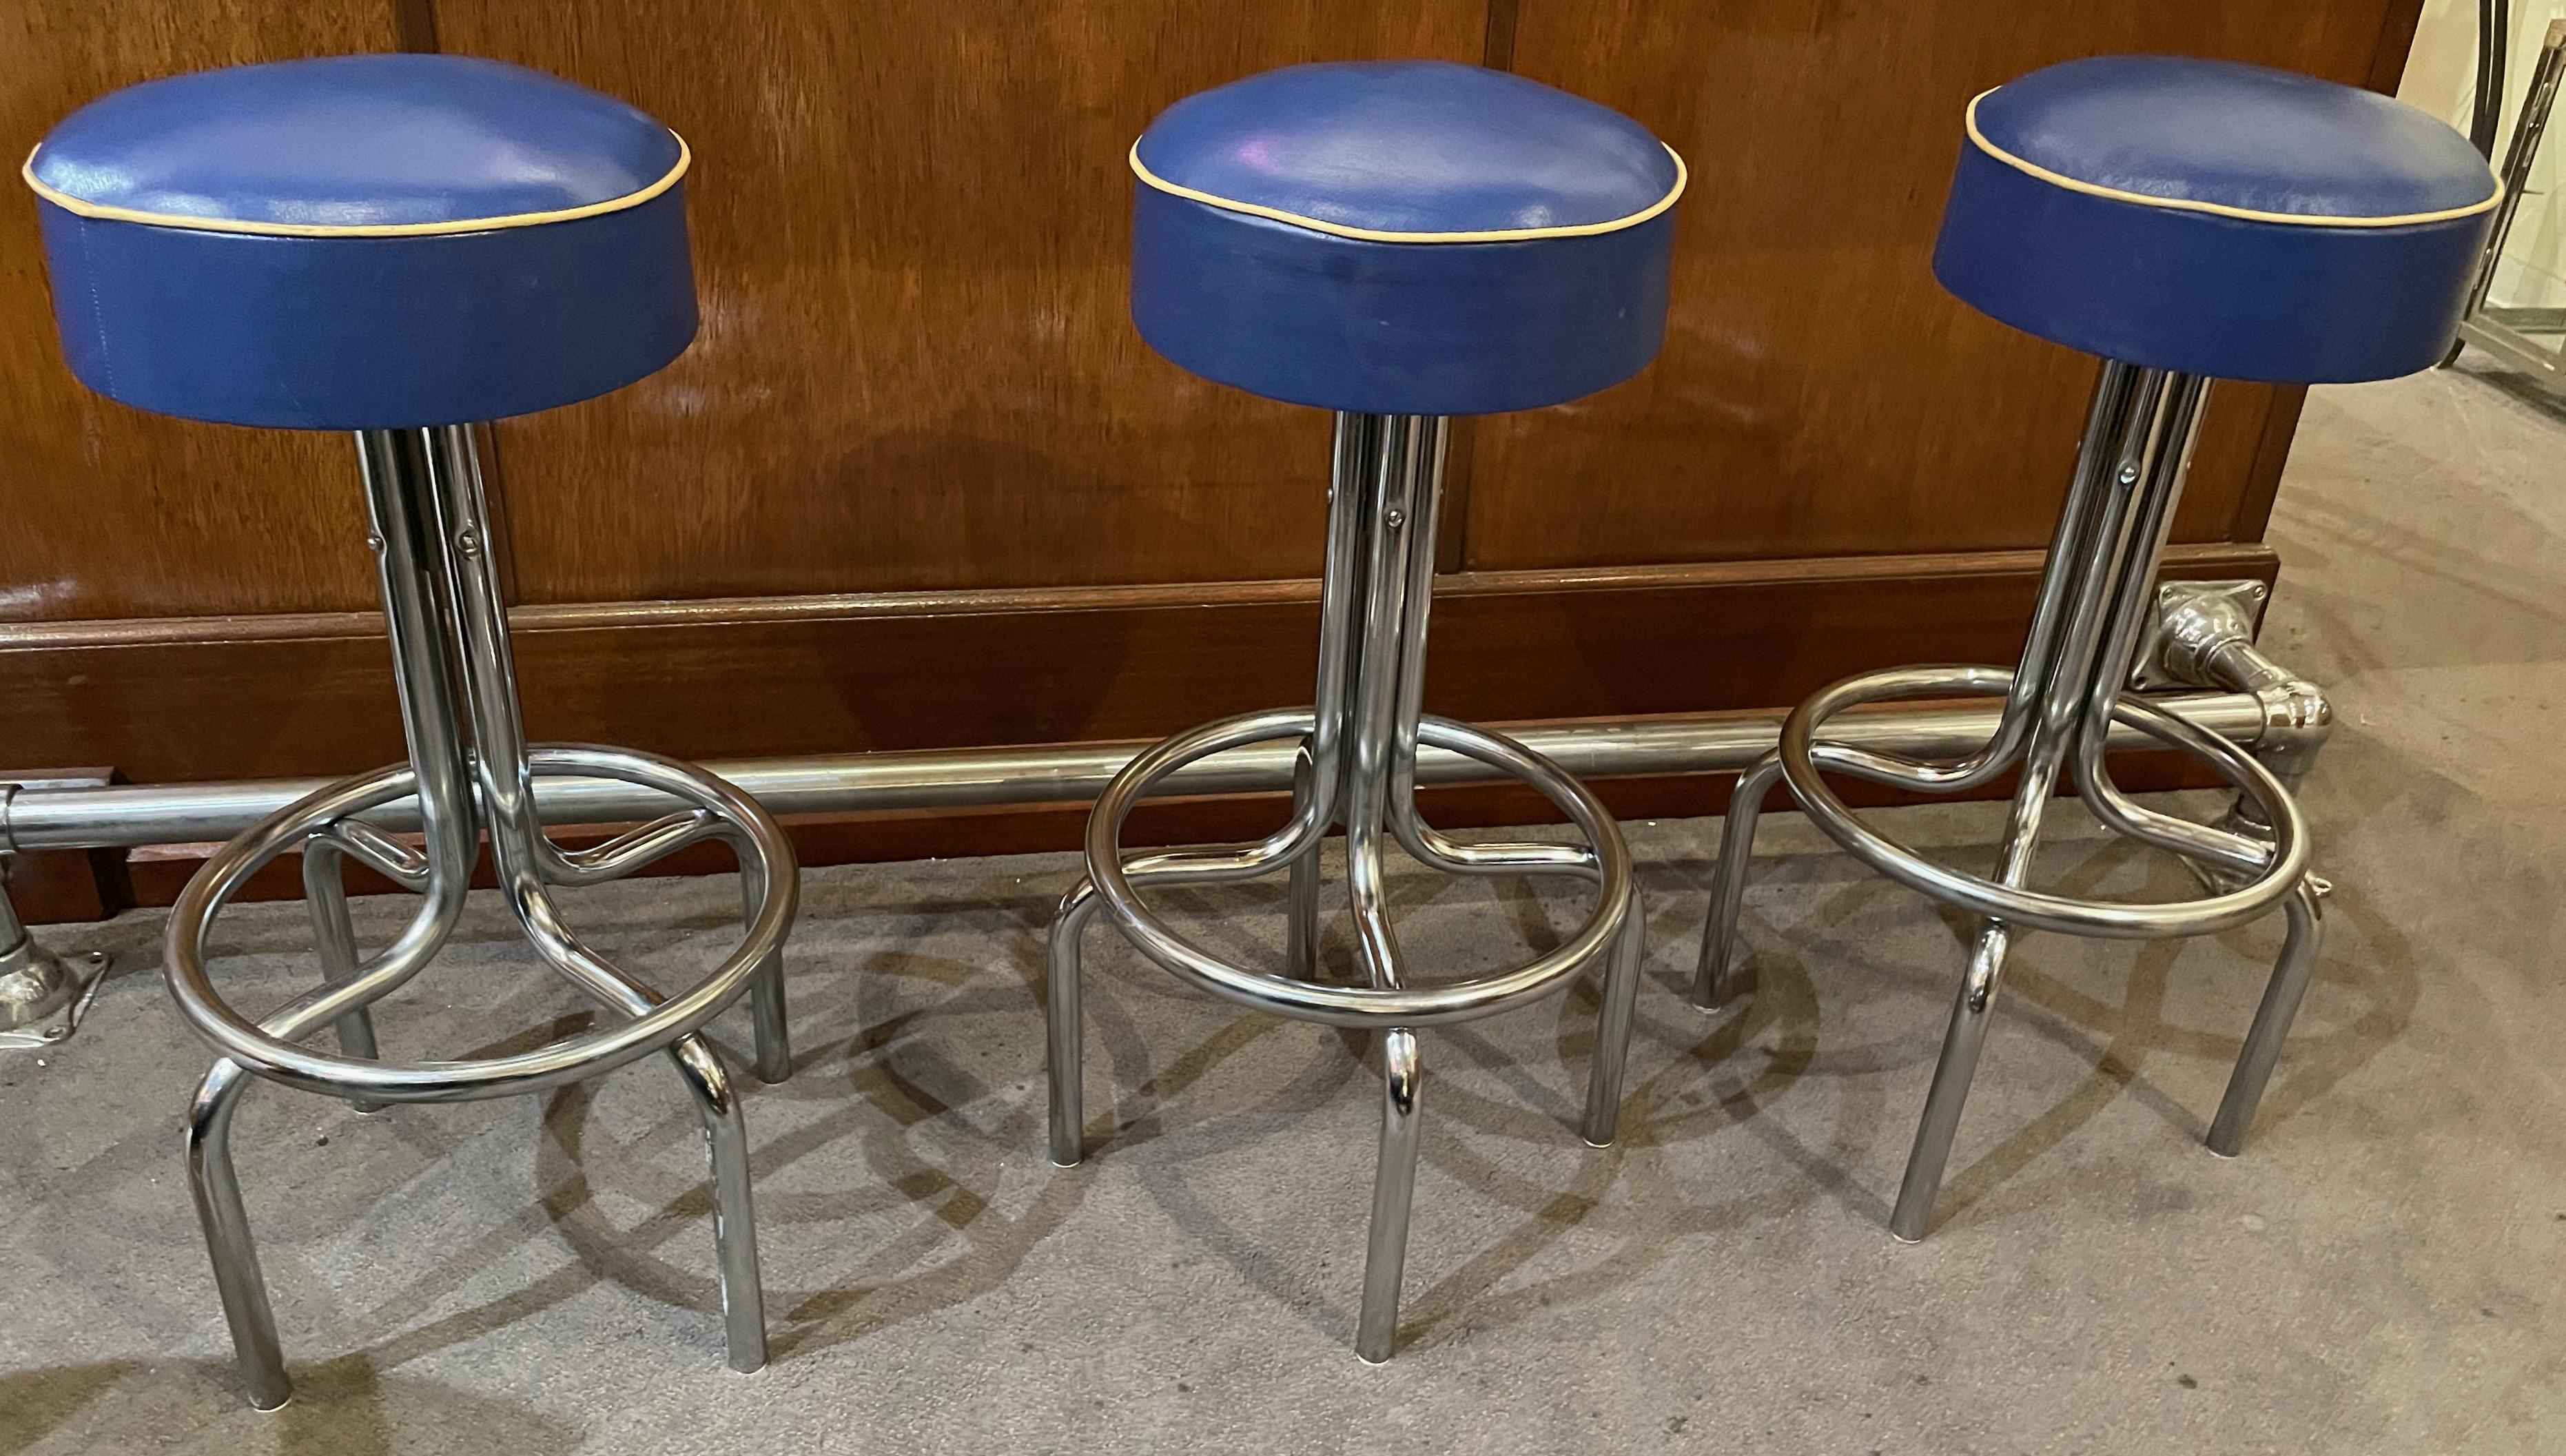 Art Deco chrome bar stools with swiveling original tops. Great looking and all original condition. Hard to find bar stools or counter seats. We have 6 in total and you can buy them in pairs, four or six. Unusual periwinkle color with contrasting